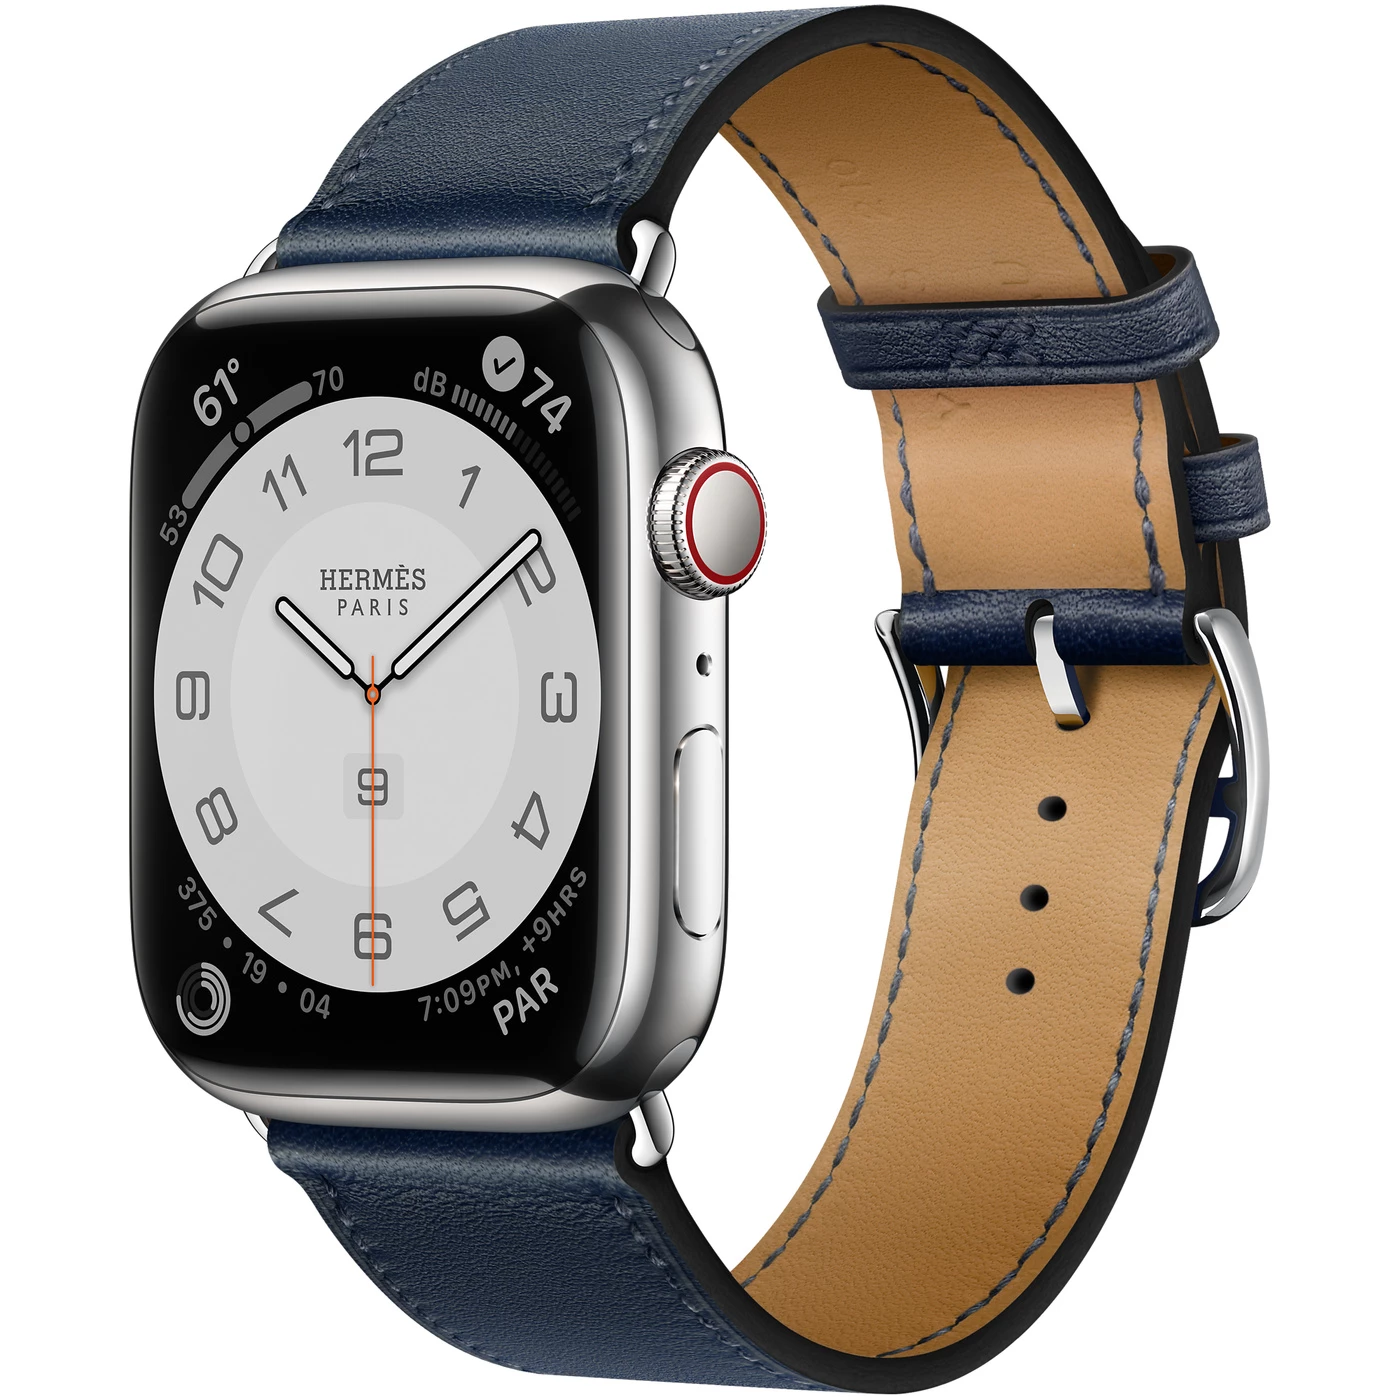 care+】Apple Watch HERMES S7 45mm 銀 #062 | kensysgas.com